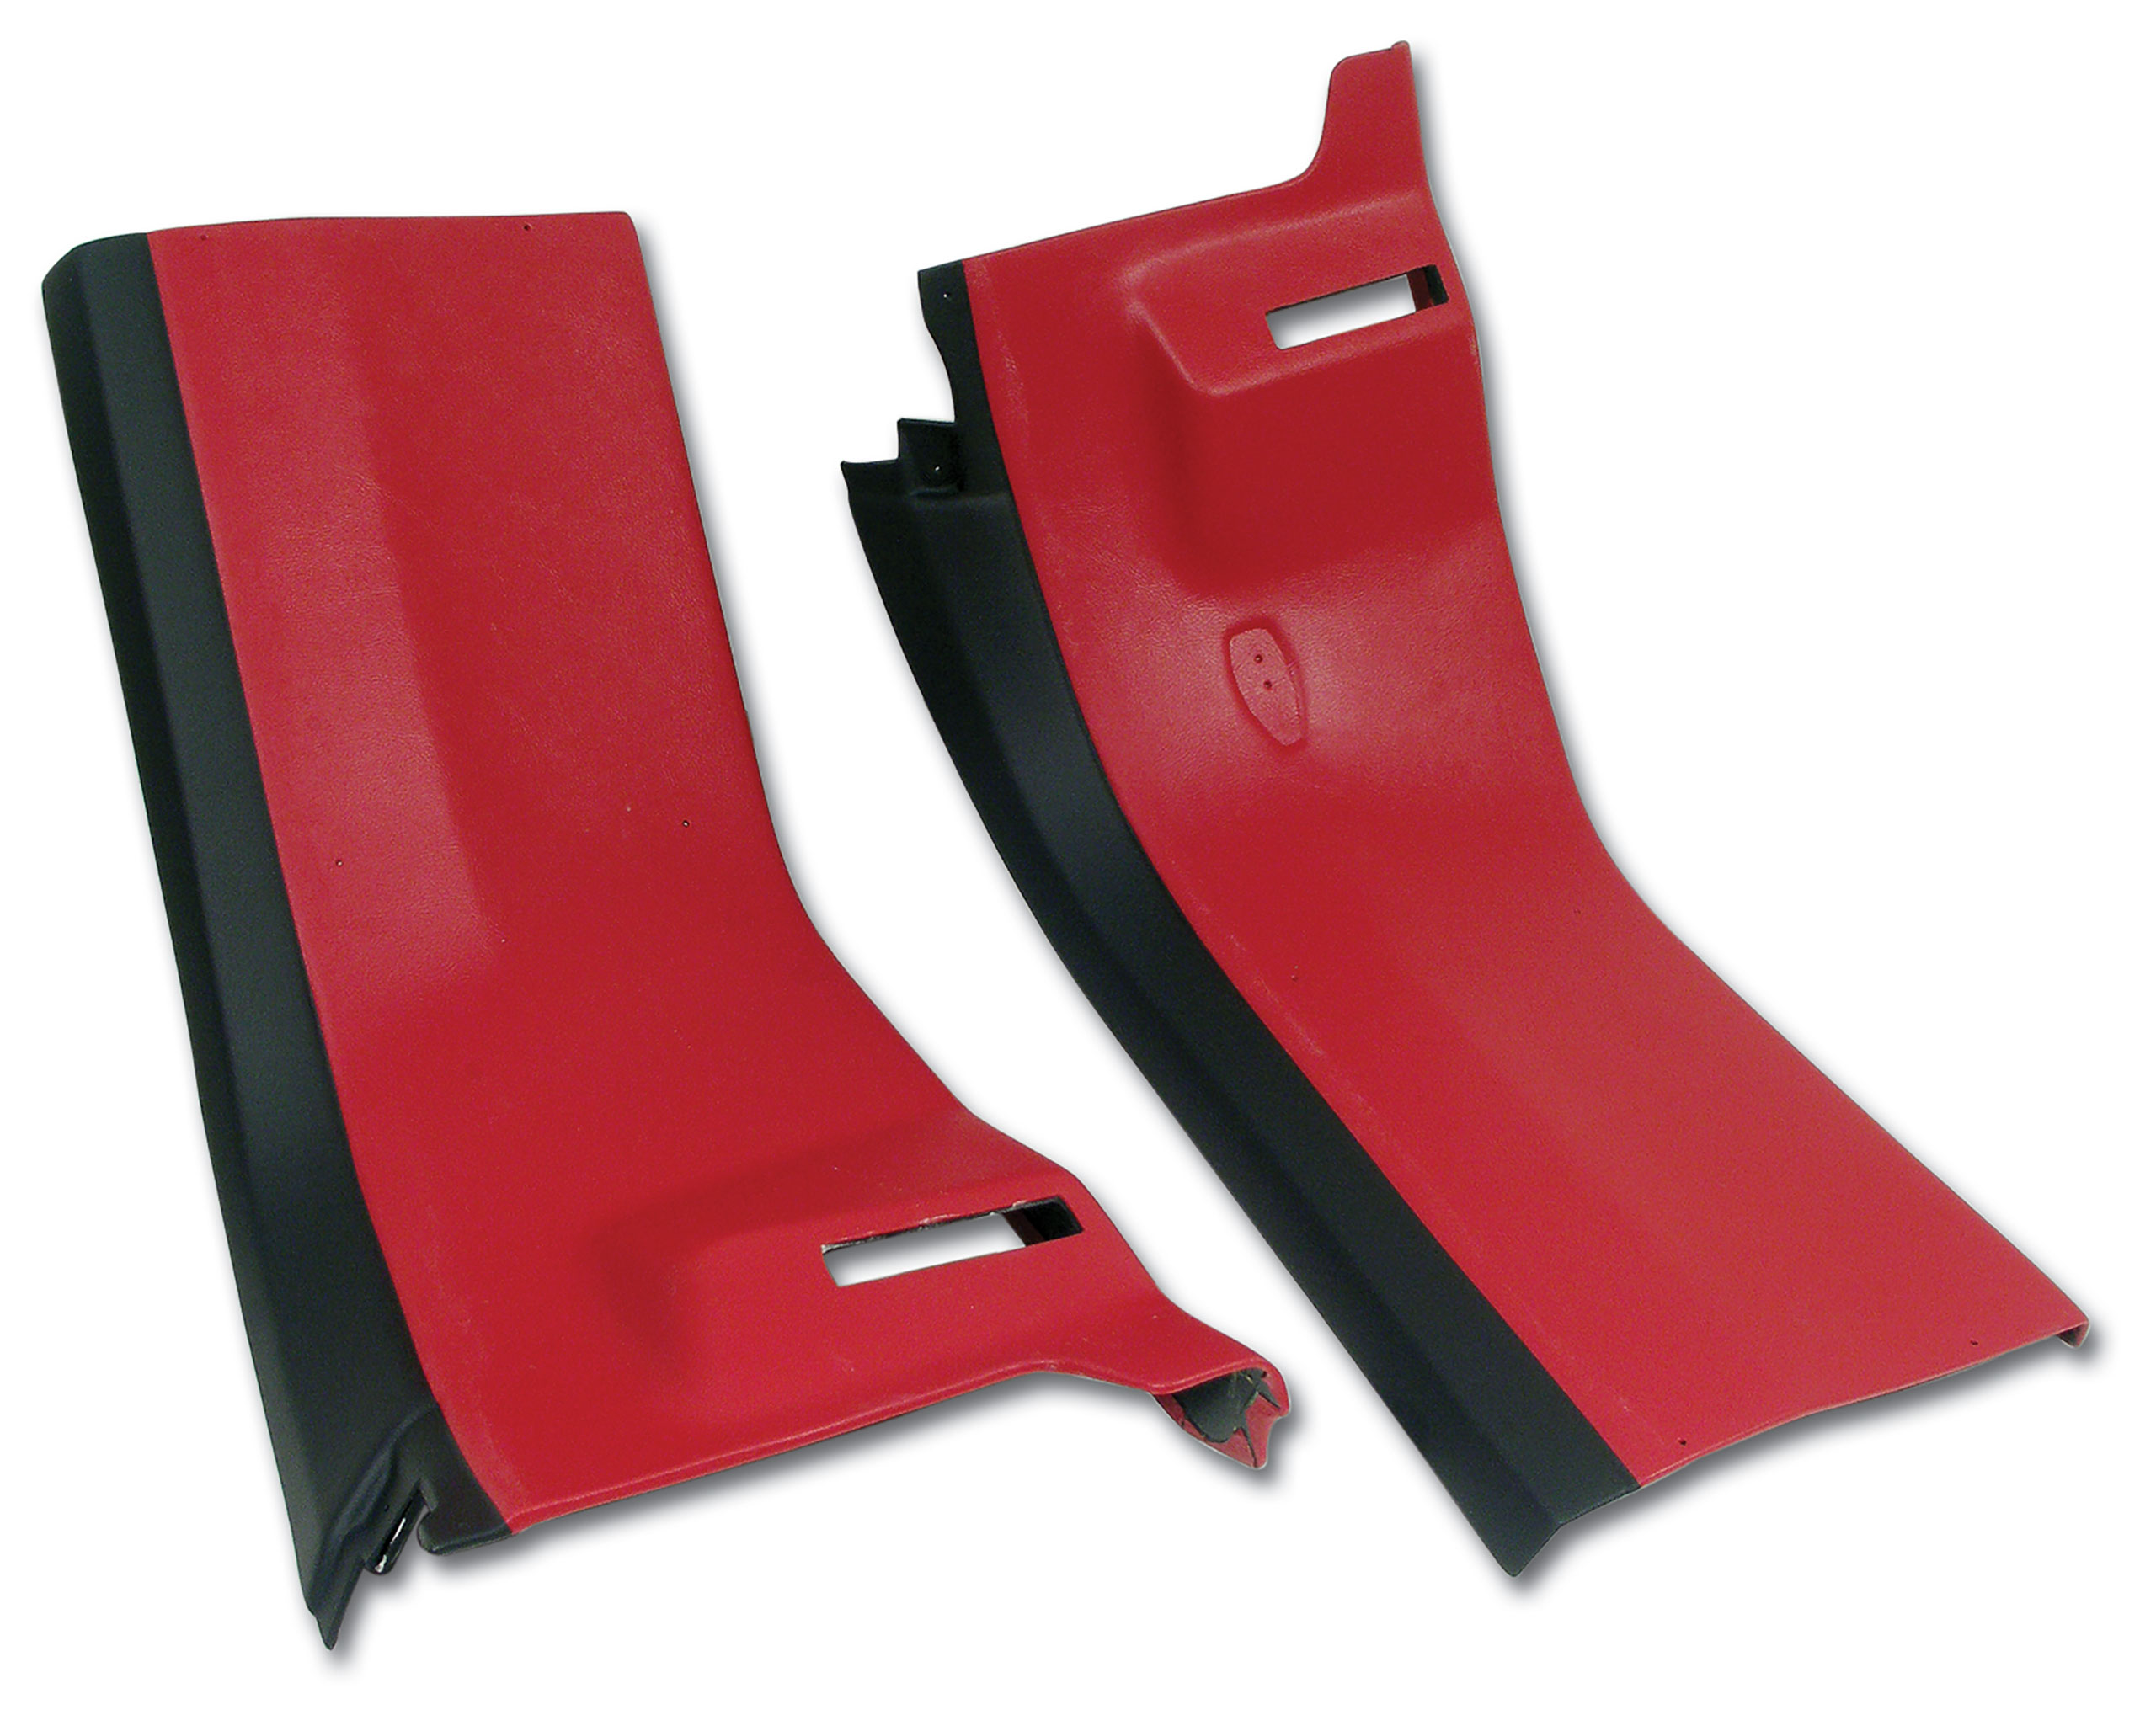 1978-1979 Corvette C3 Rear Coupe Roof Panels- Red CA-413524 